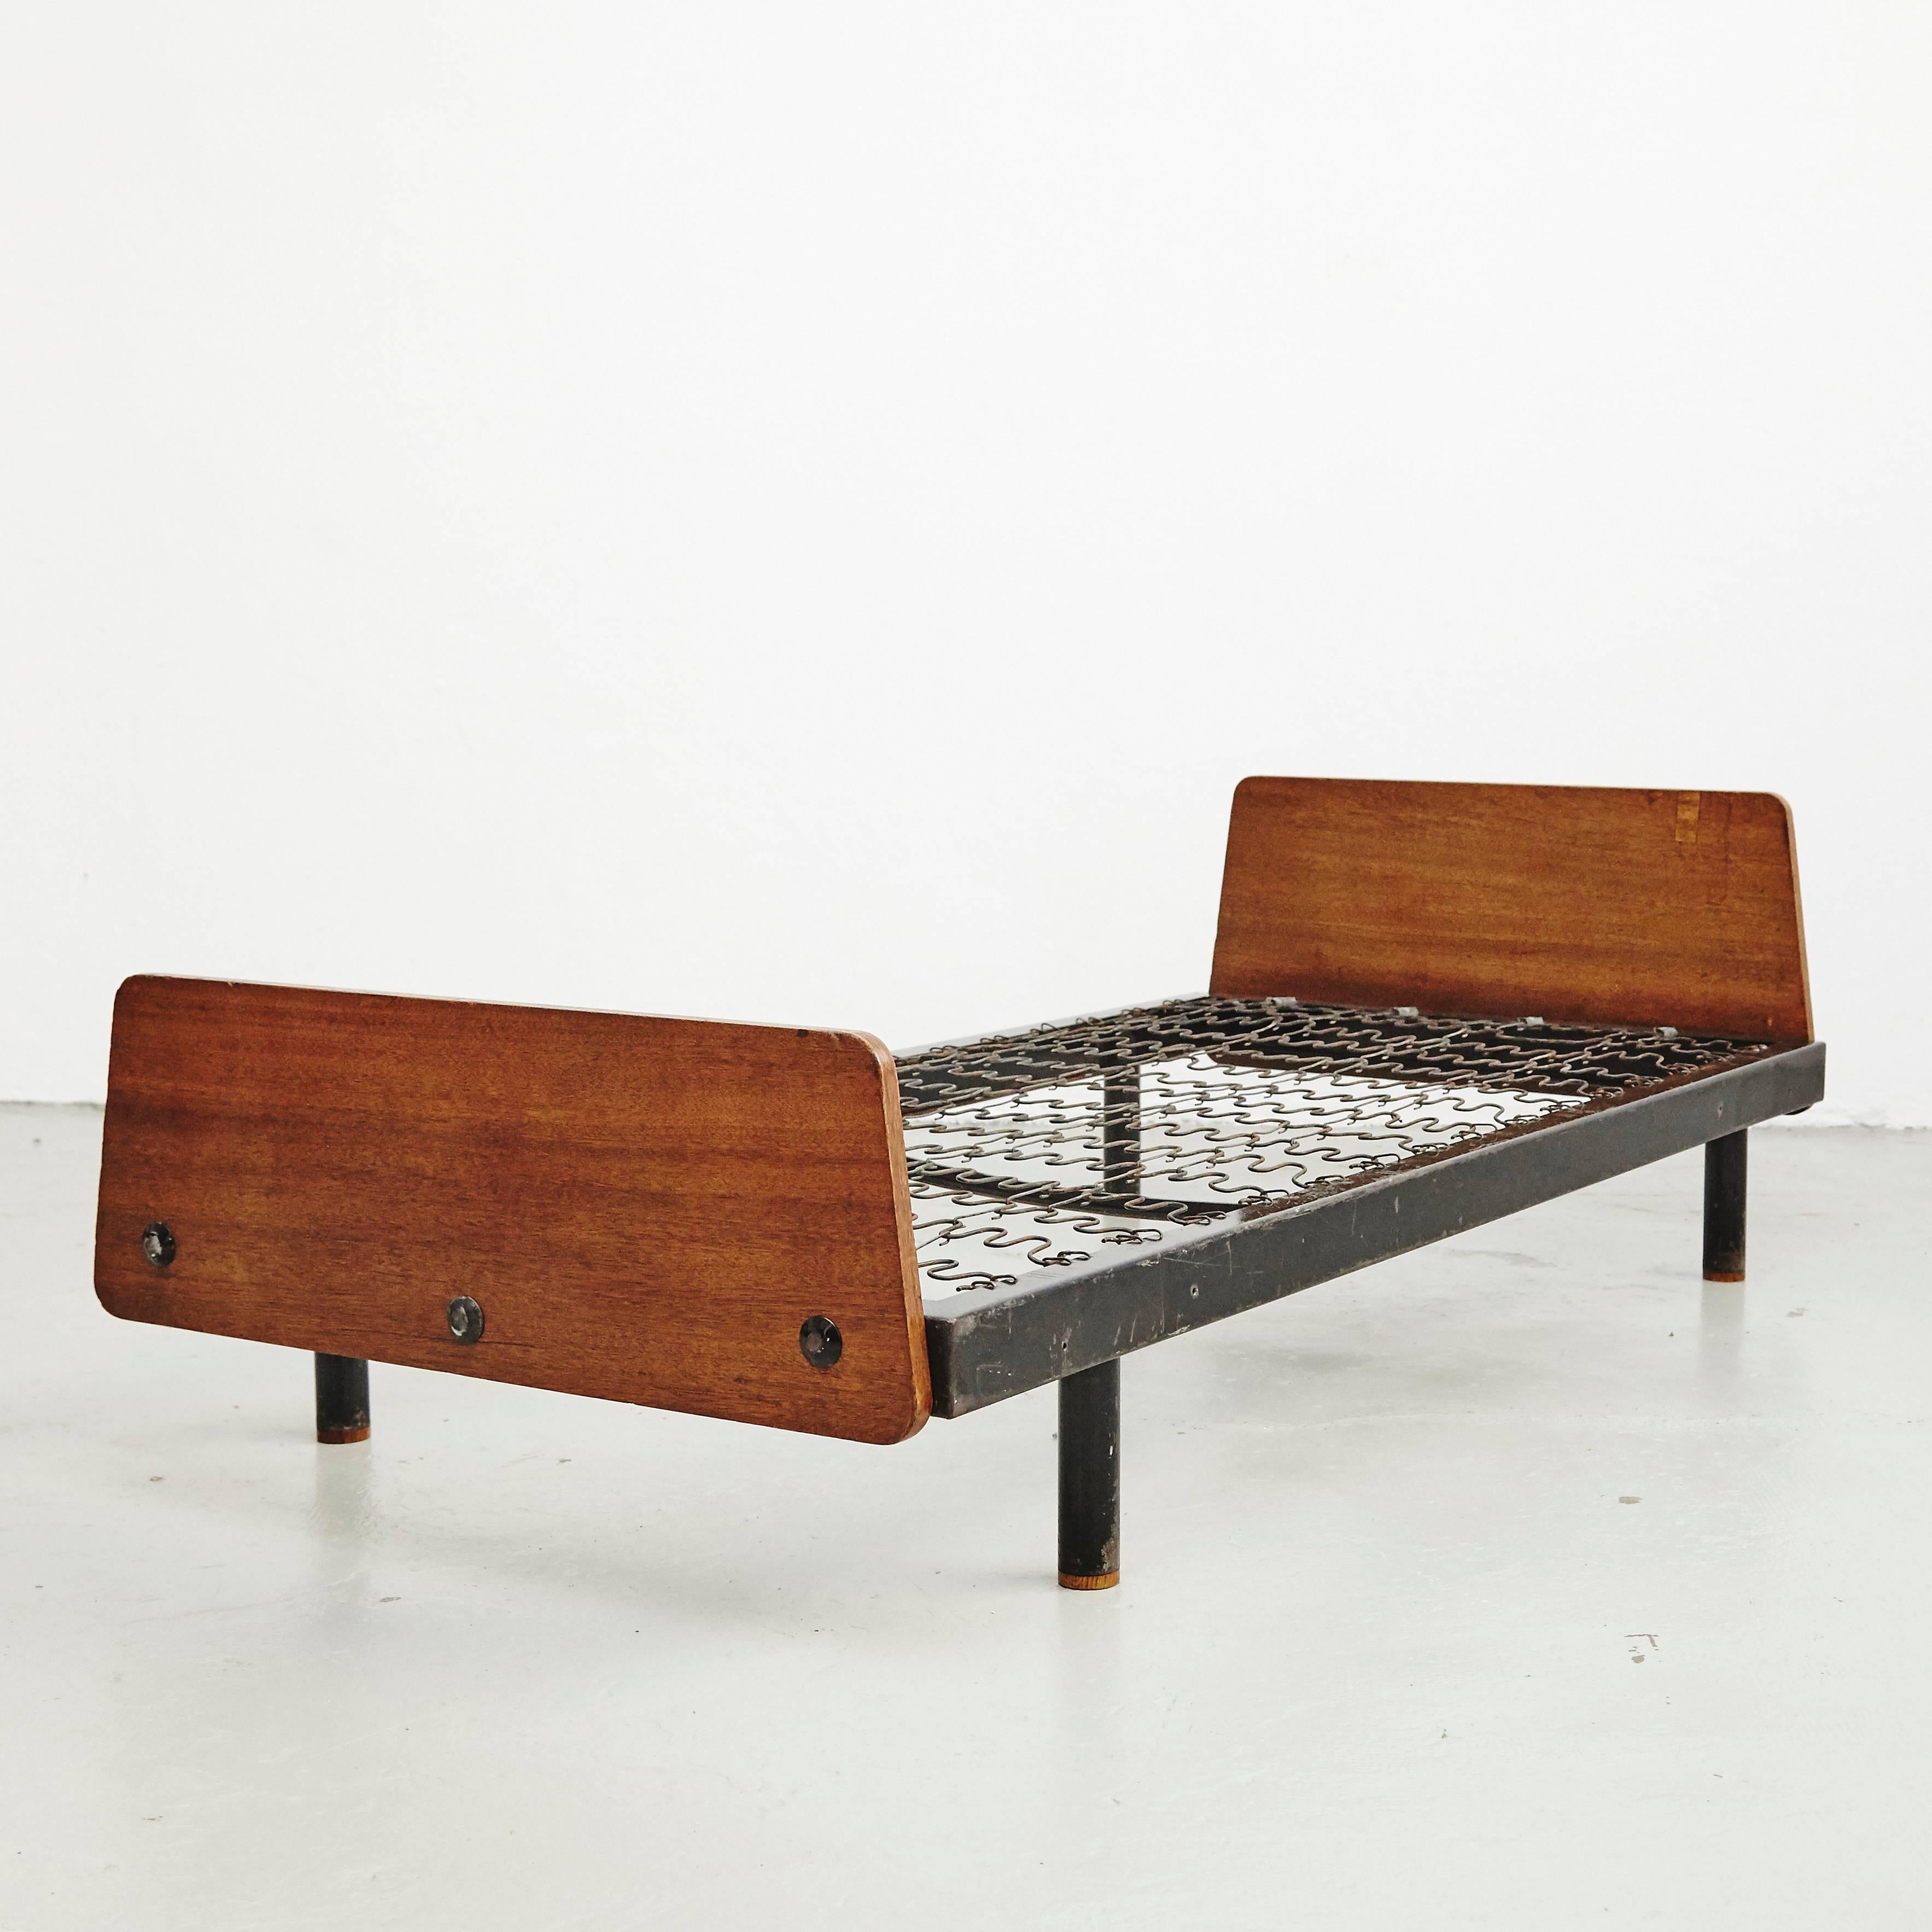 Daybed designed by Jean Prouve manufactured by Ateliers Prouve (France) around 1950

In good original condition, with minor wear consistent with age and use, preserving a beautiful patina.

Jean Prouve (1901-1984): French Industrial and